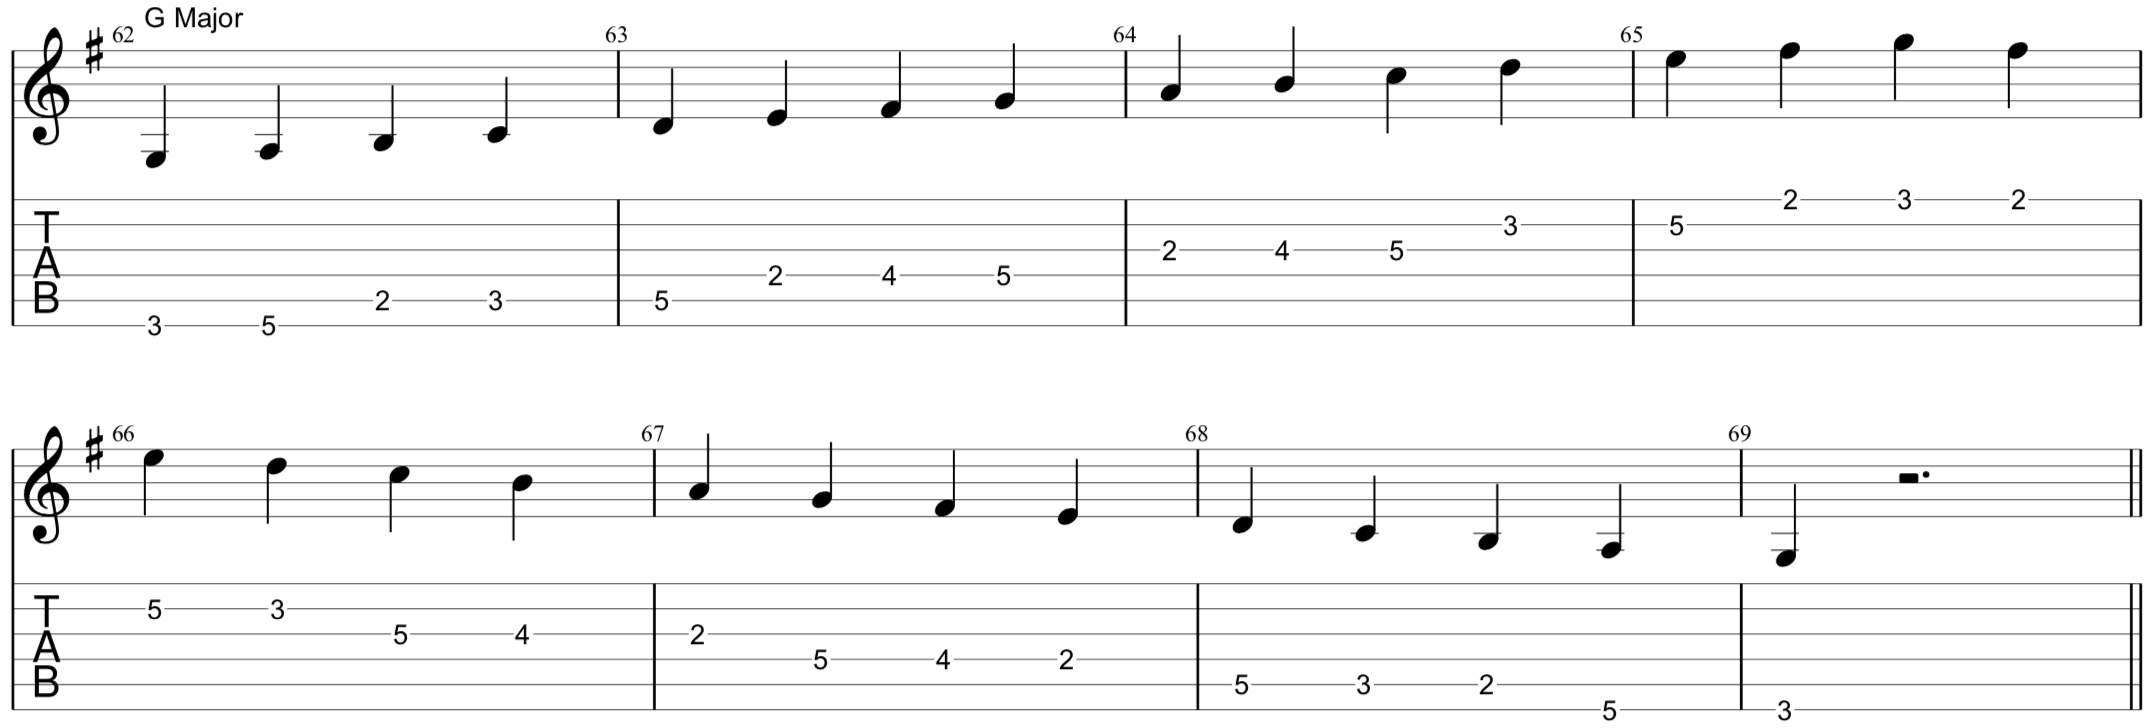 G Major scale with TAB